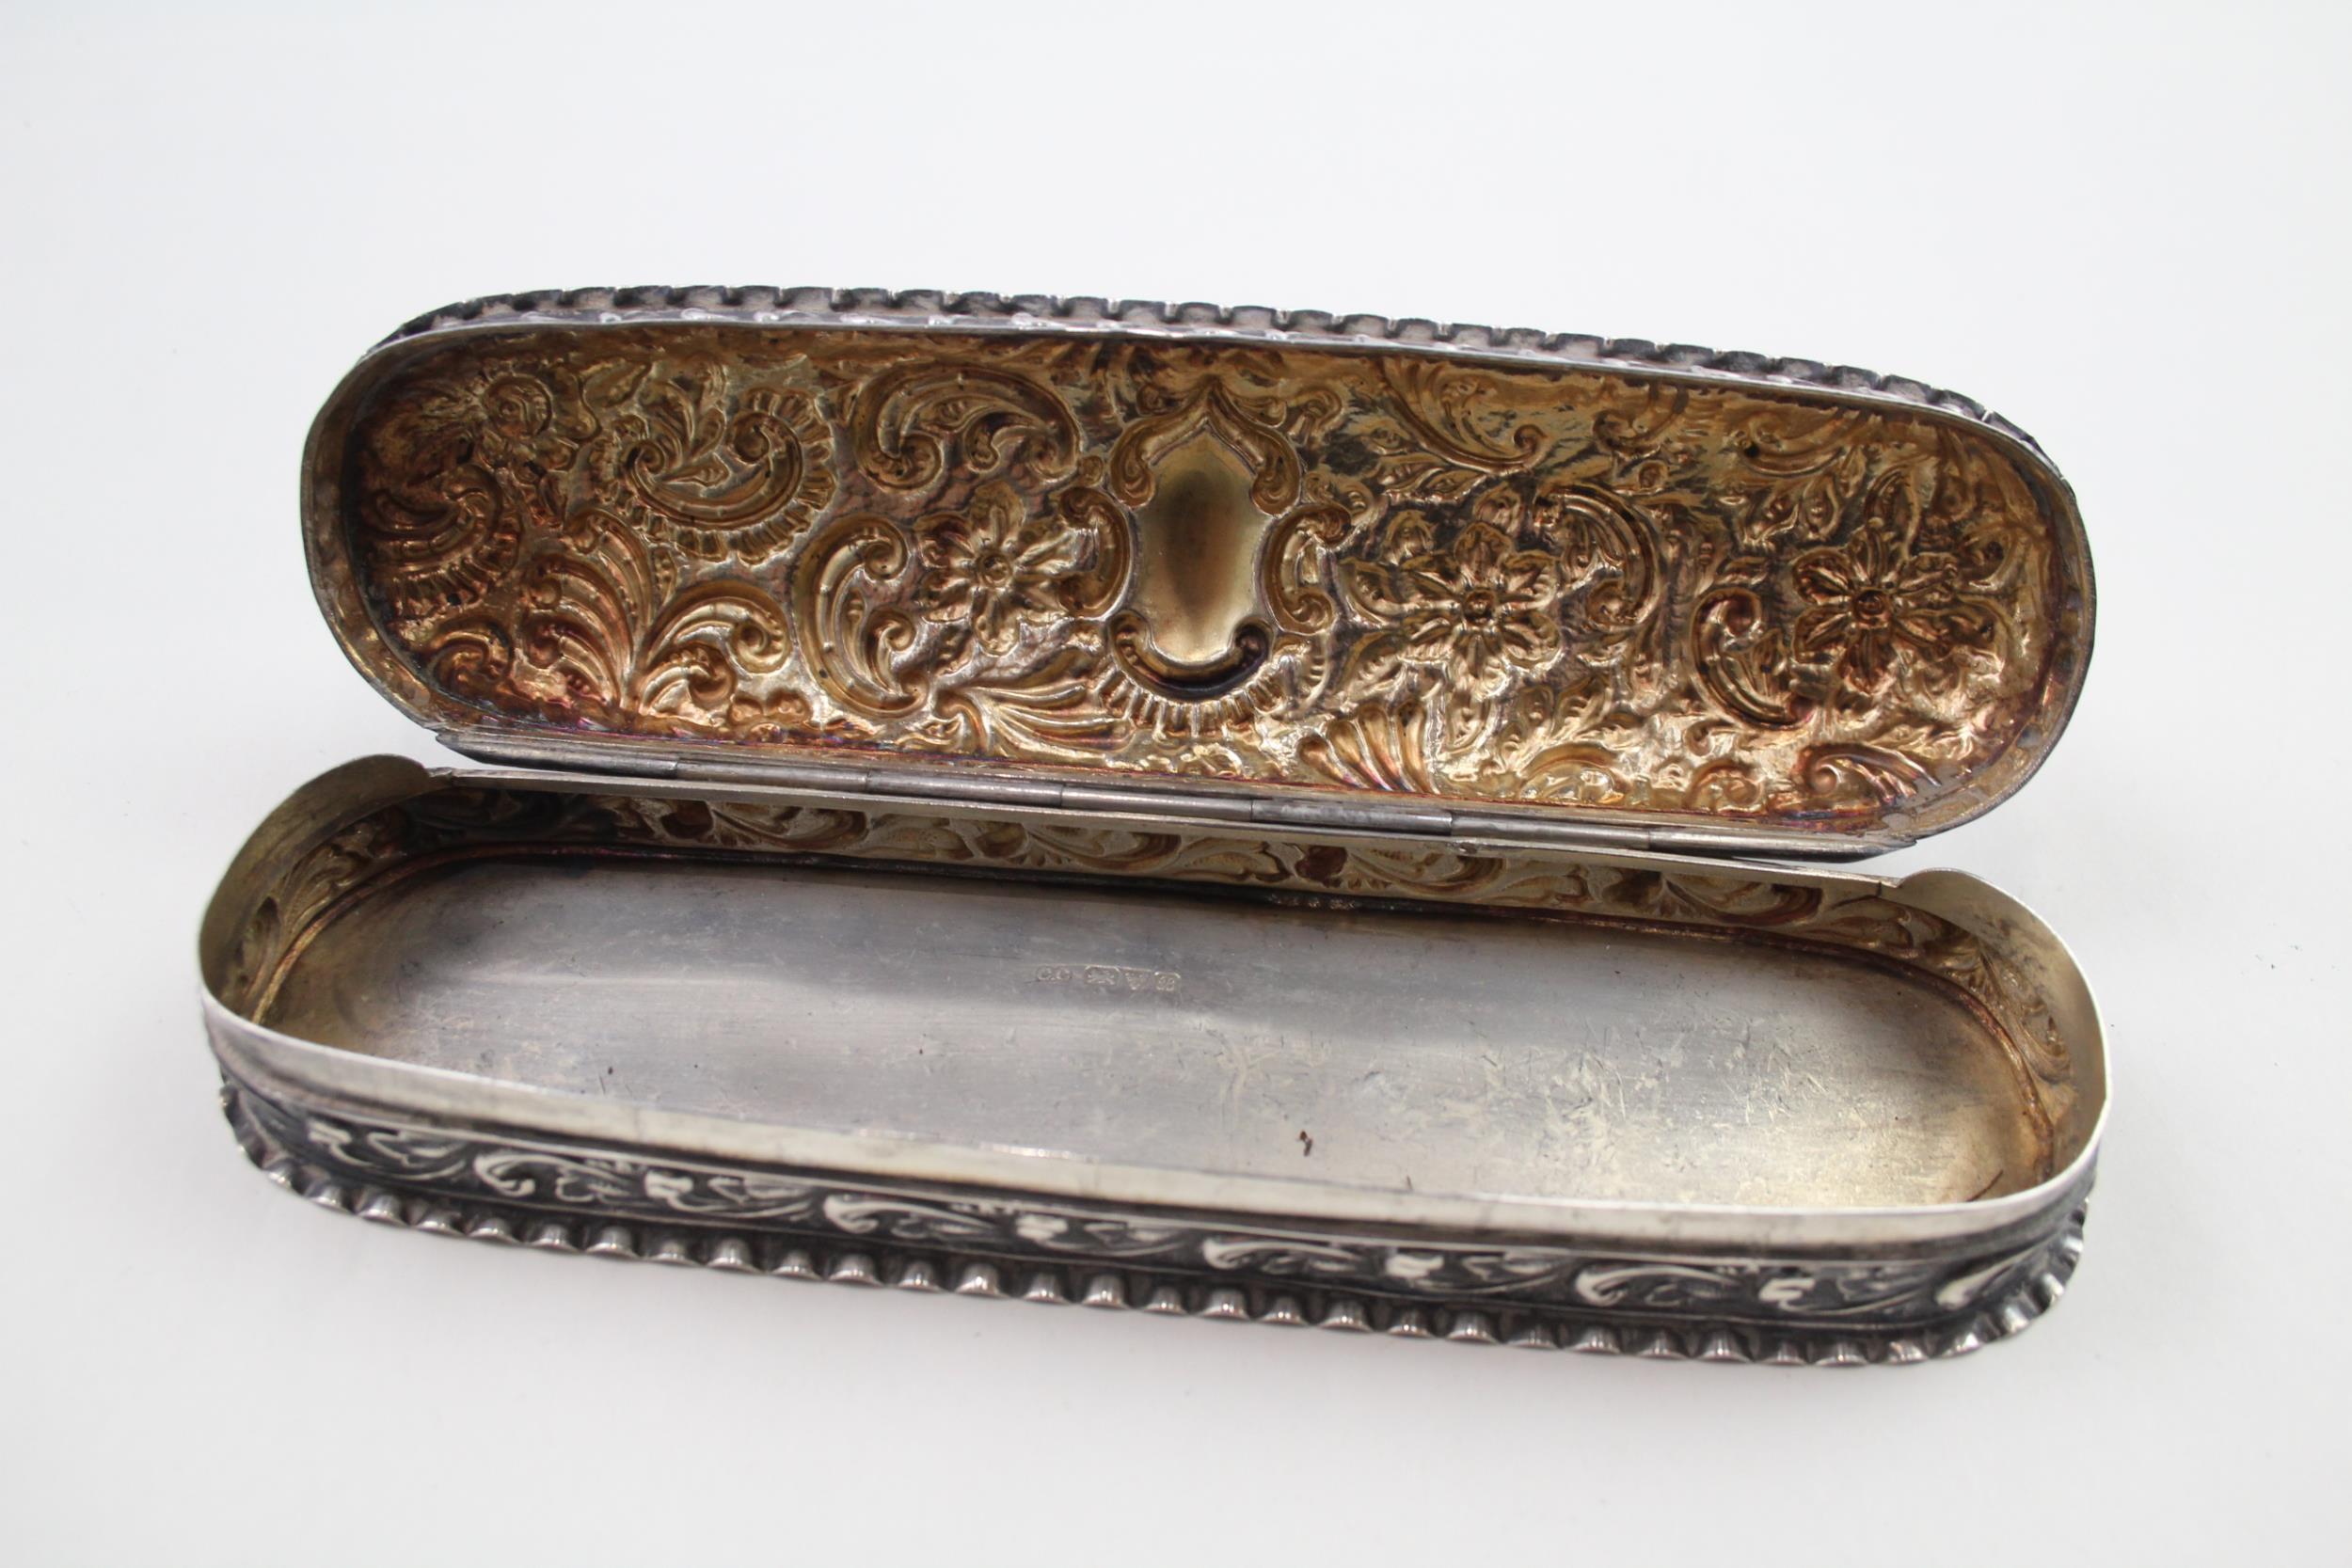 Antique Edwardian 1902 Chester Sterling Silver Long Trinket / Jewellery Box 129g - w/ Engraved - Image 7 of 8